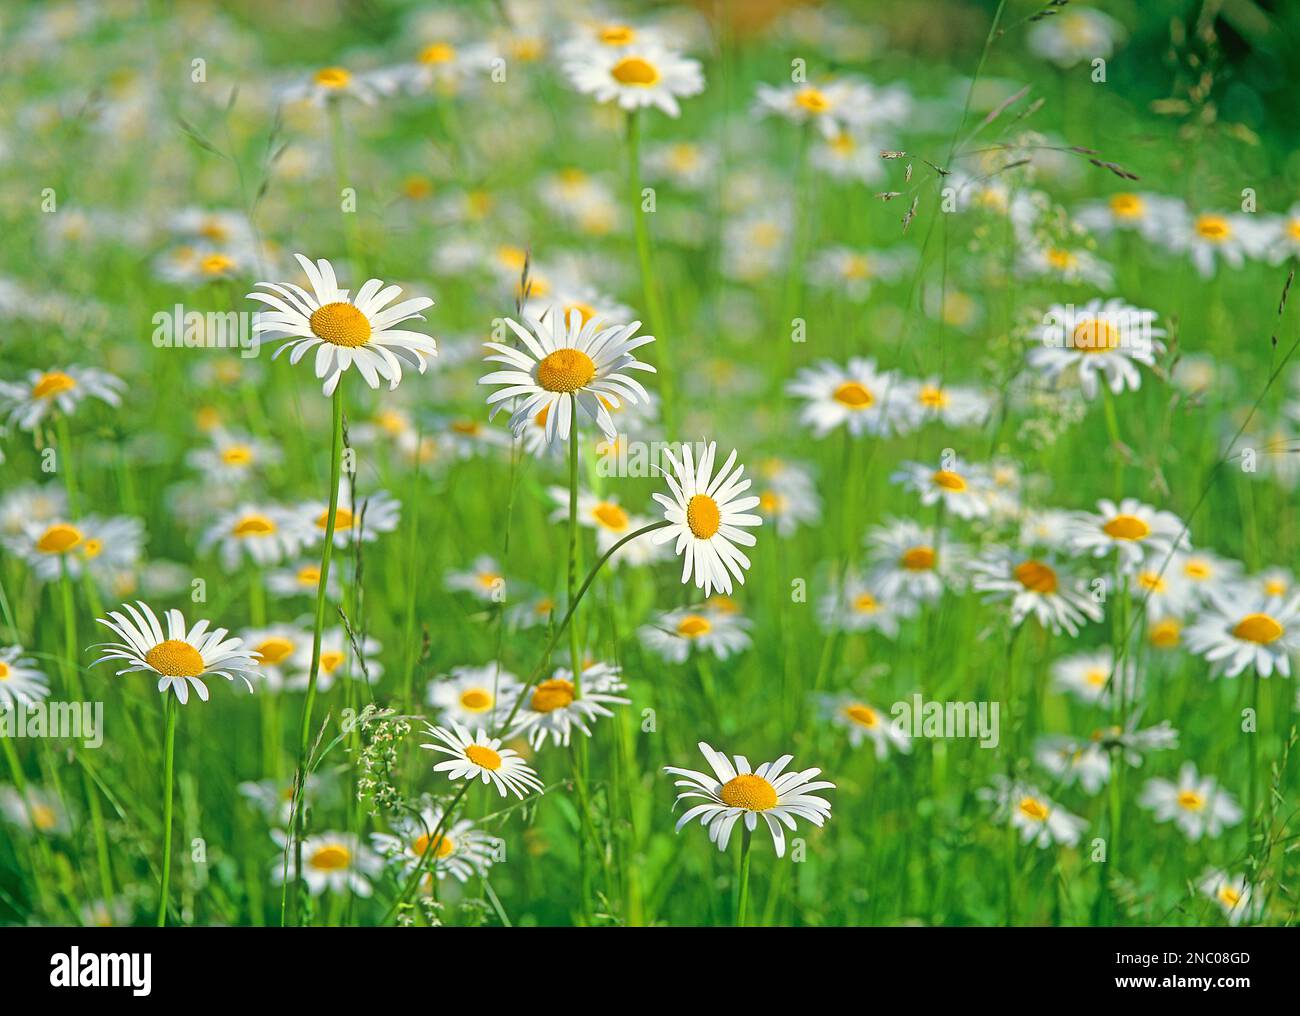 Dry meadow with oxeye daisies Chrysanthemum leucanthemum/ Chrysanthemum vulgare South Germany Stock Photo